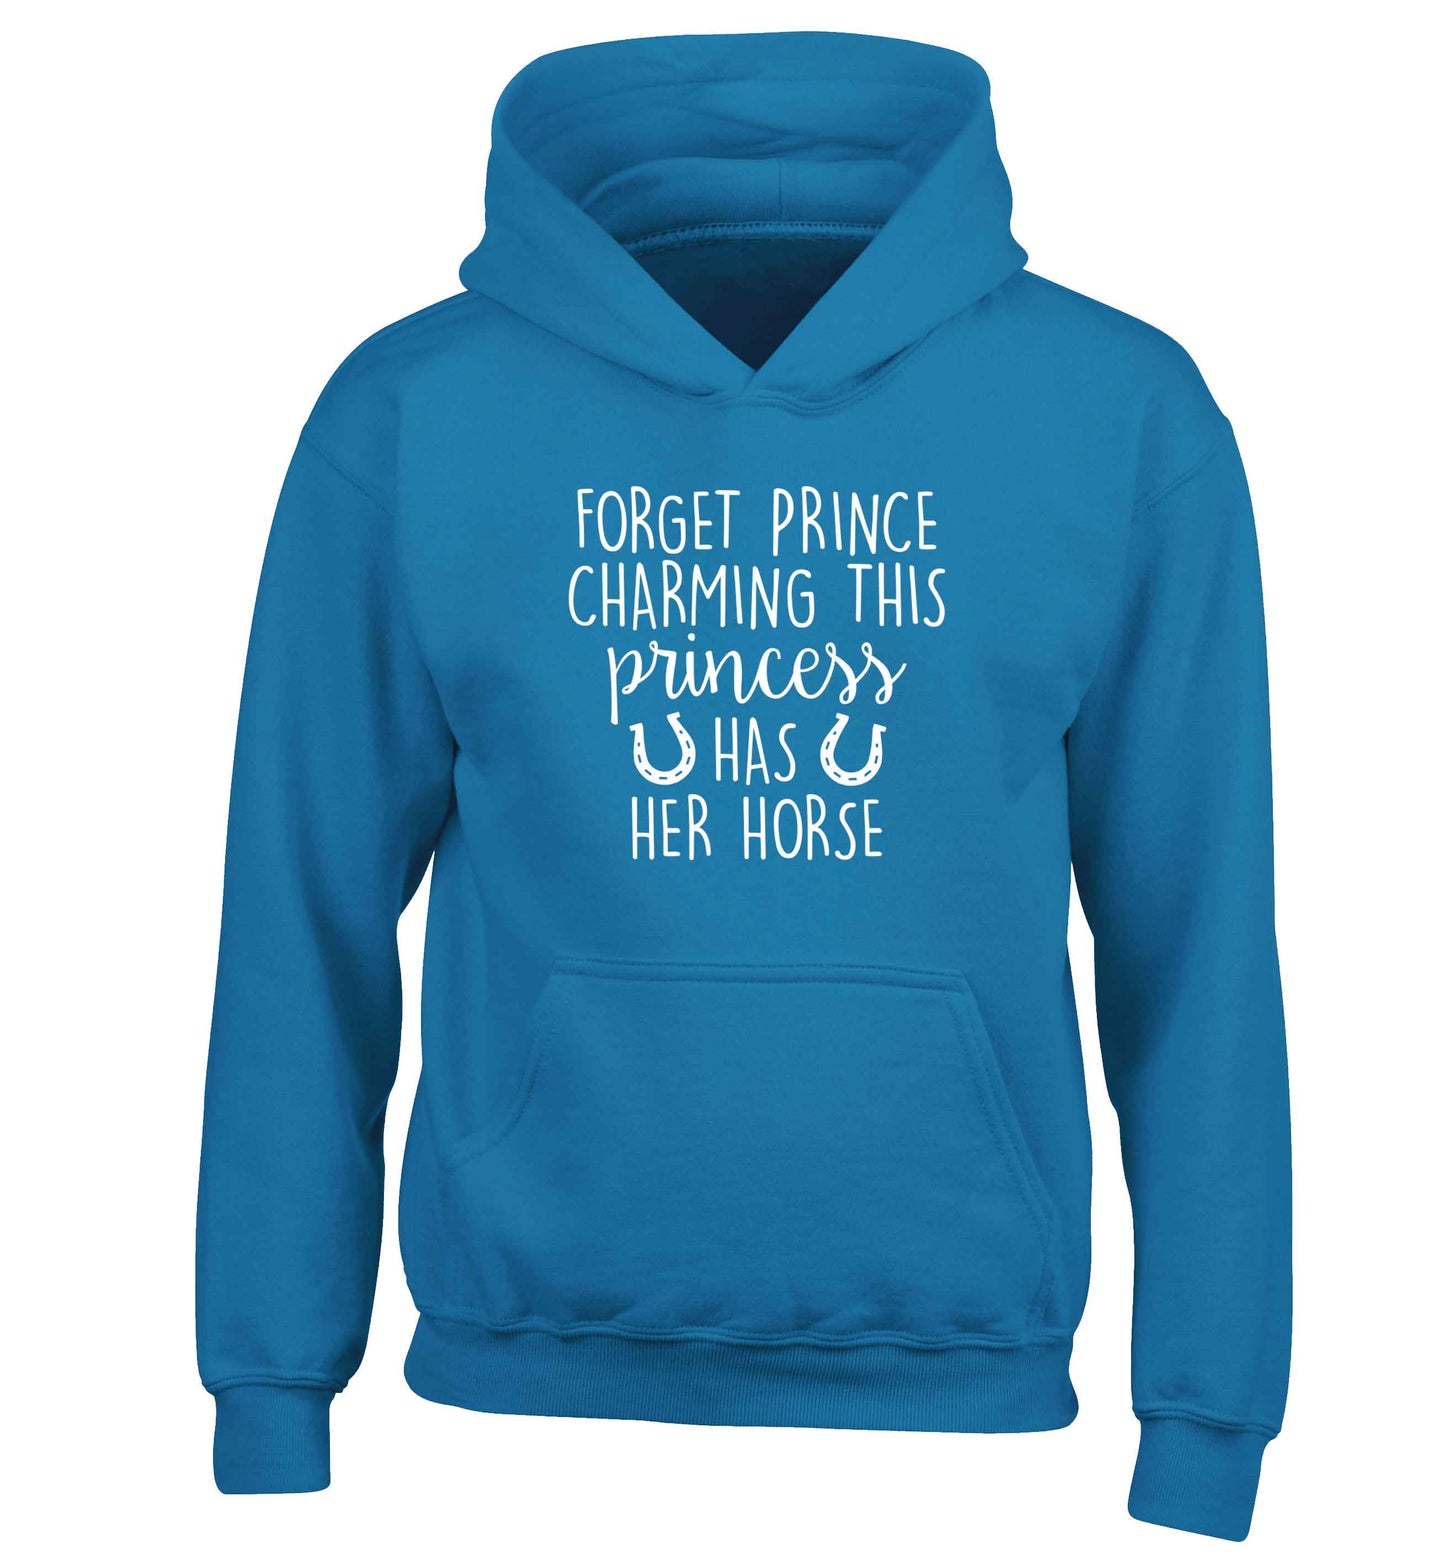 Forget prince charming this princess has her horse children's blue hoodie 12-13 Years